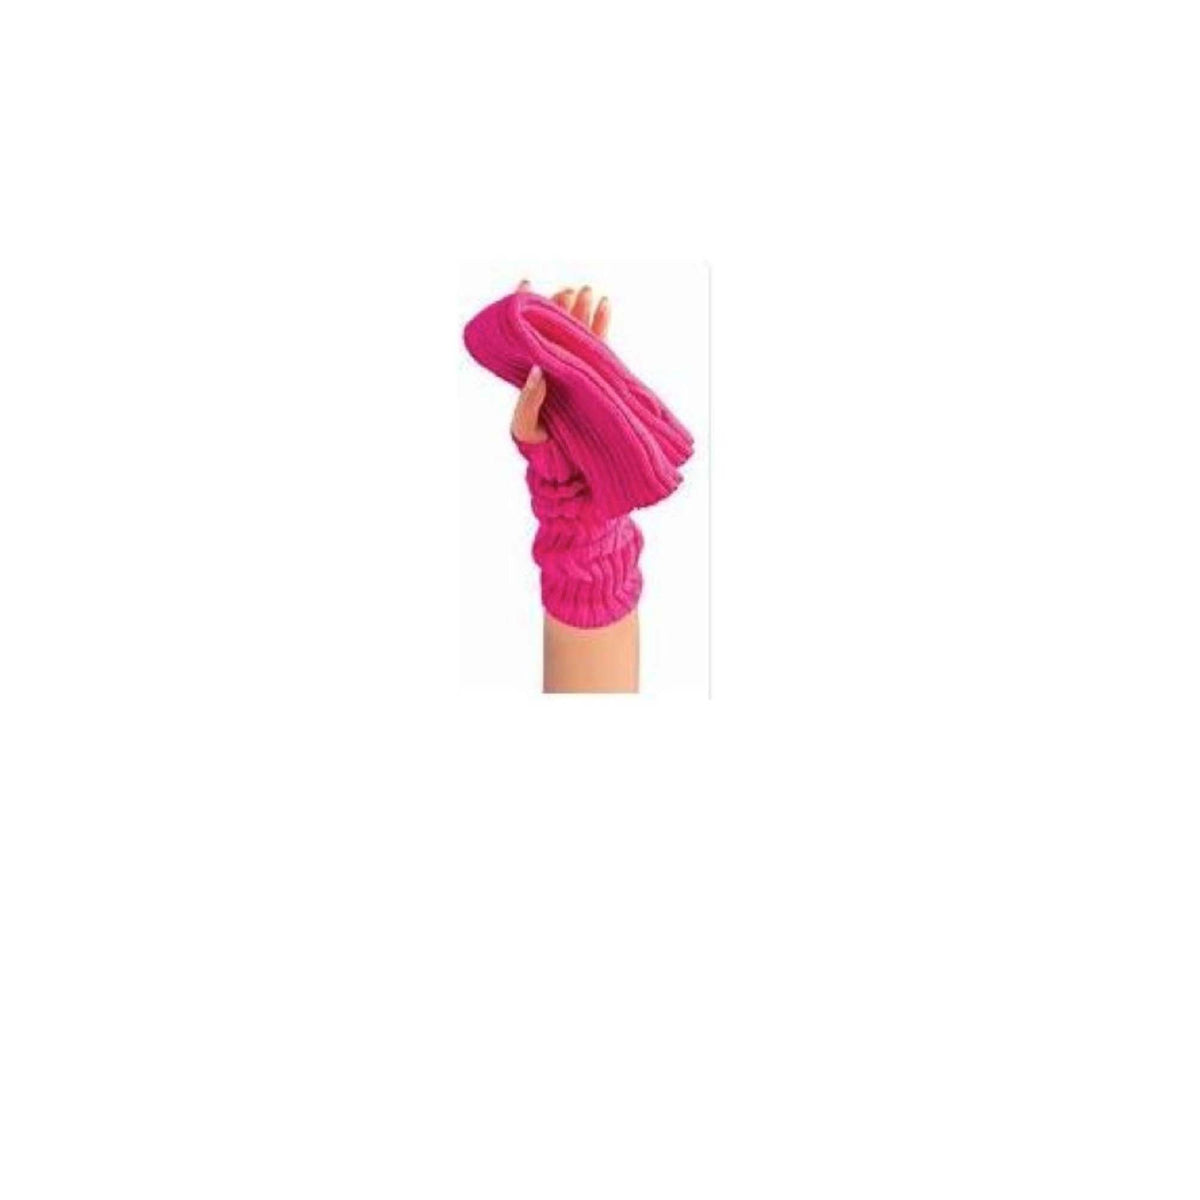 H M NOUVEAUTE LTEE Costume Accessories 80s Pink Wrist Warmers for Adults, 1 Count